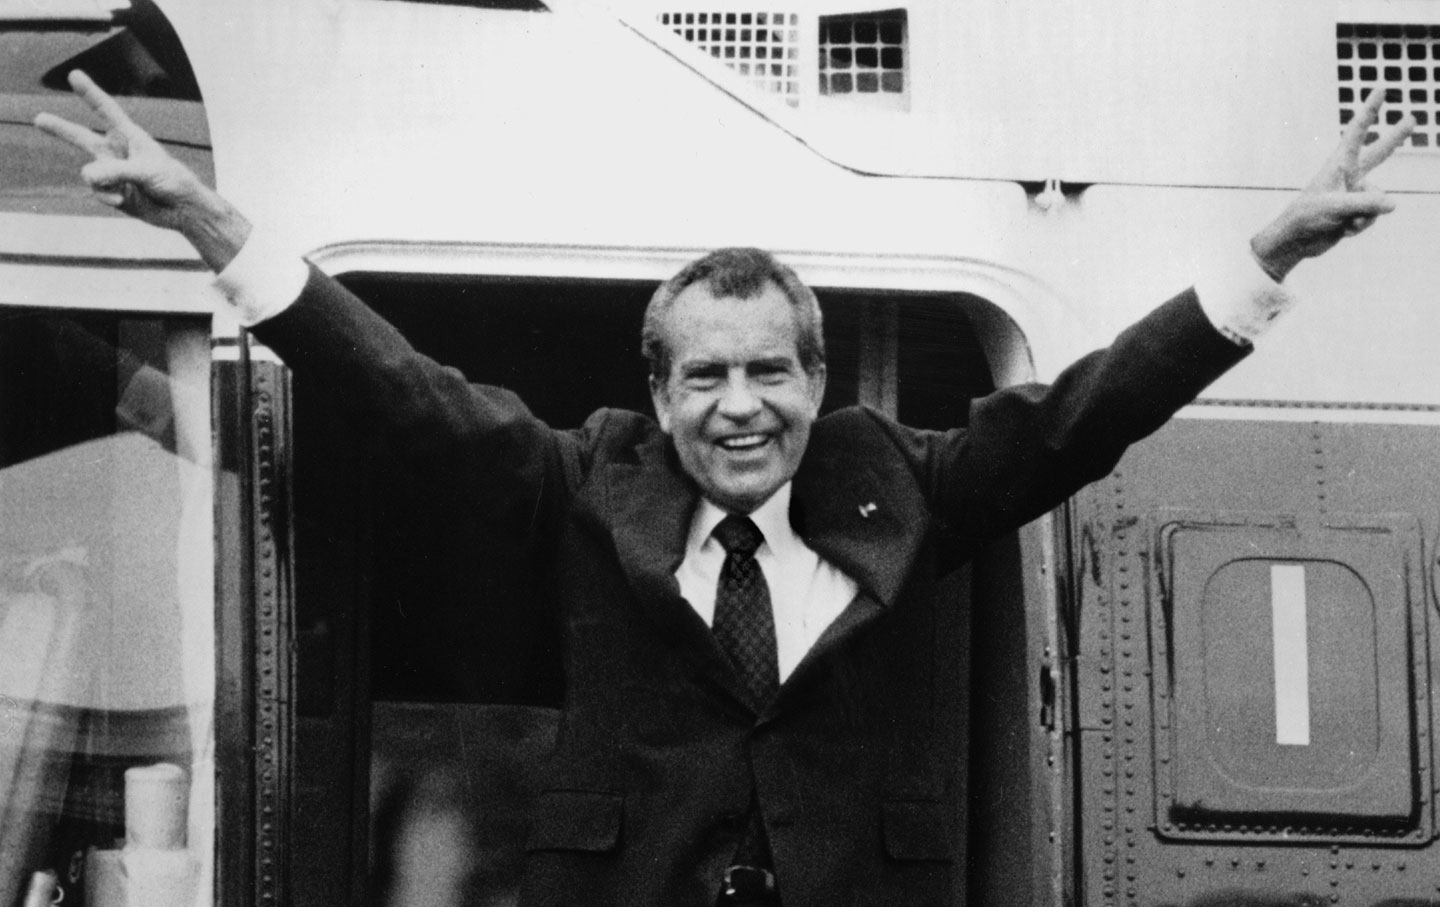 Nixon after resigning the Presidency